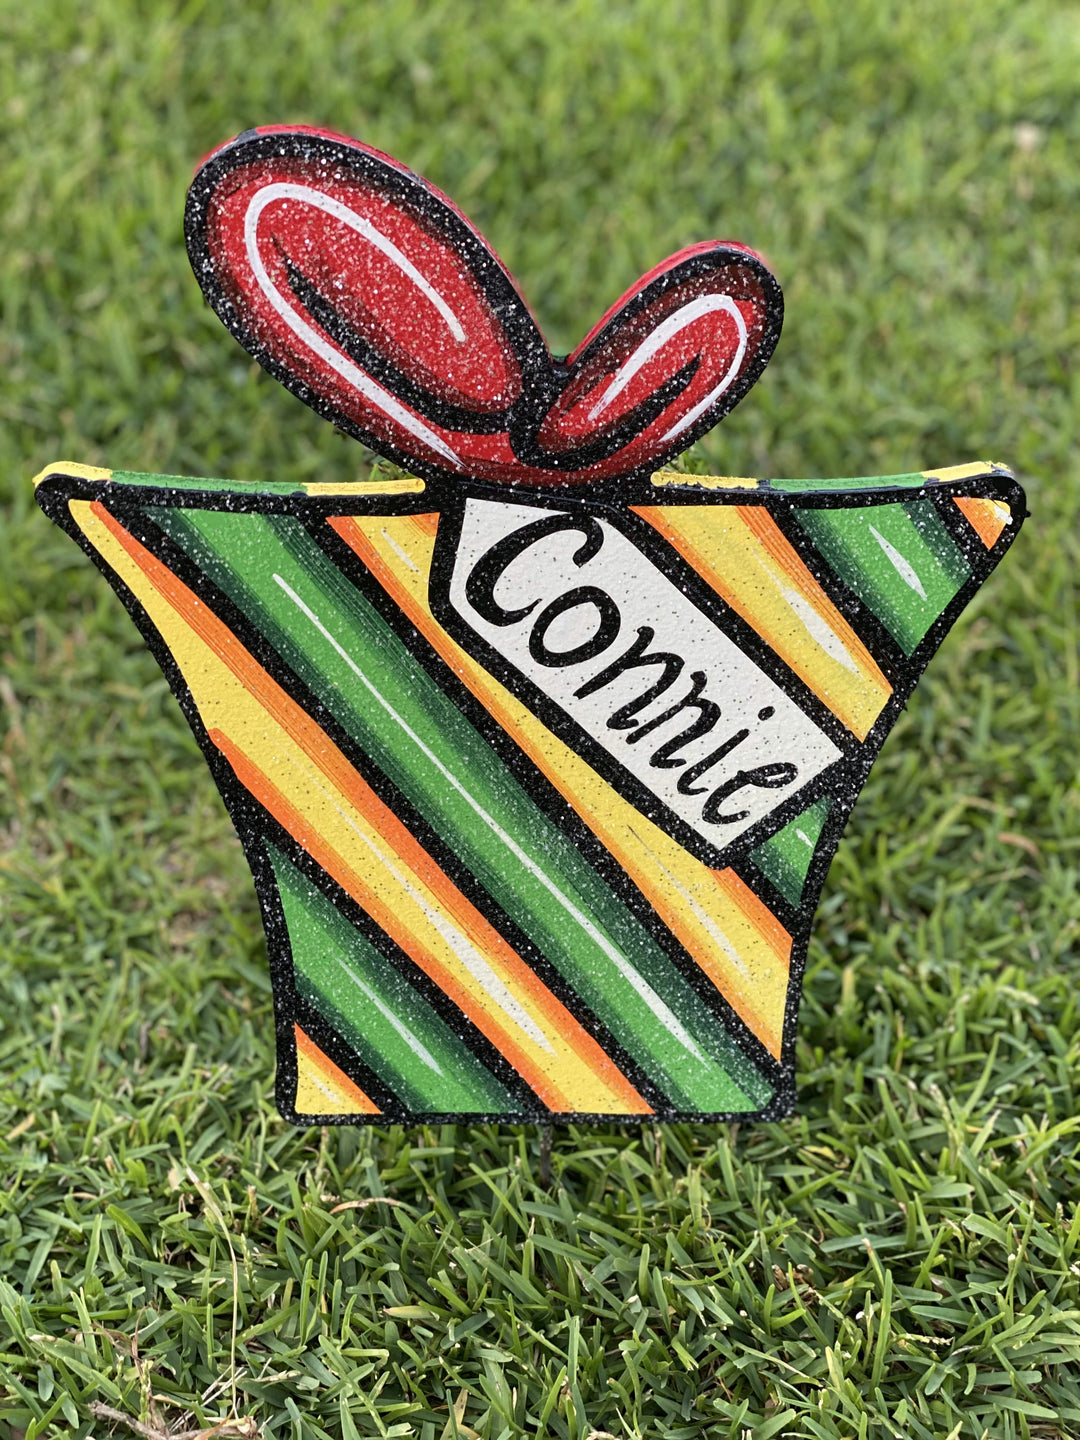 striped Christmas present with tag painted yard art design